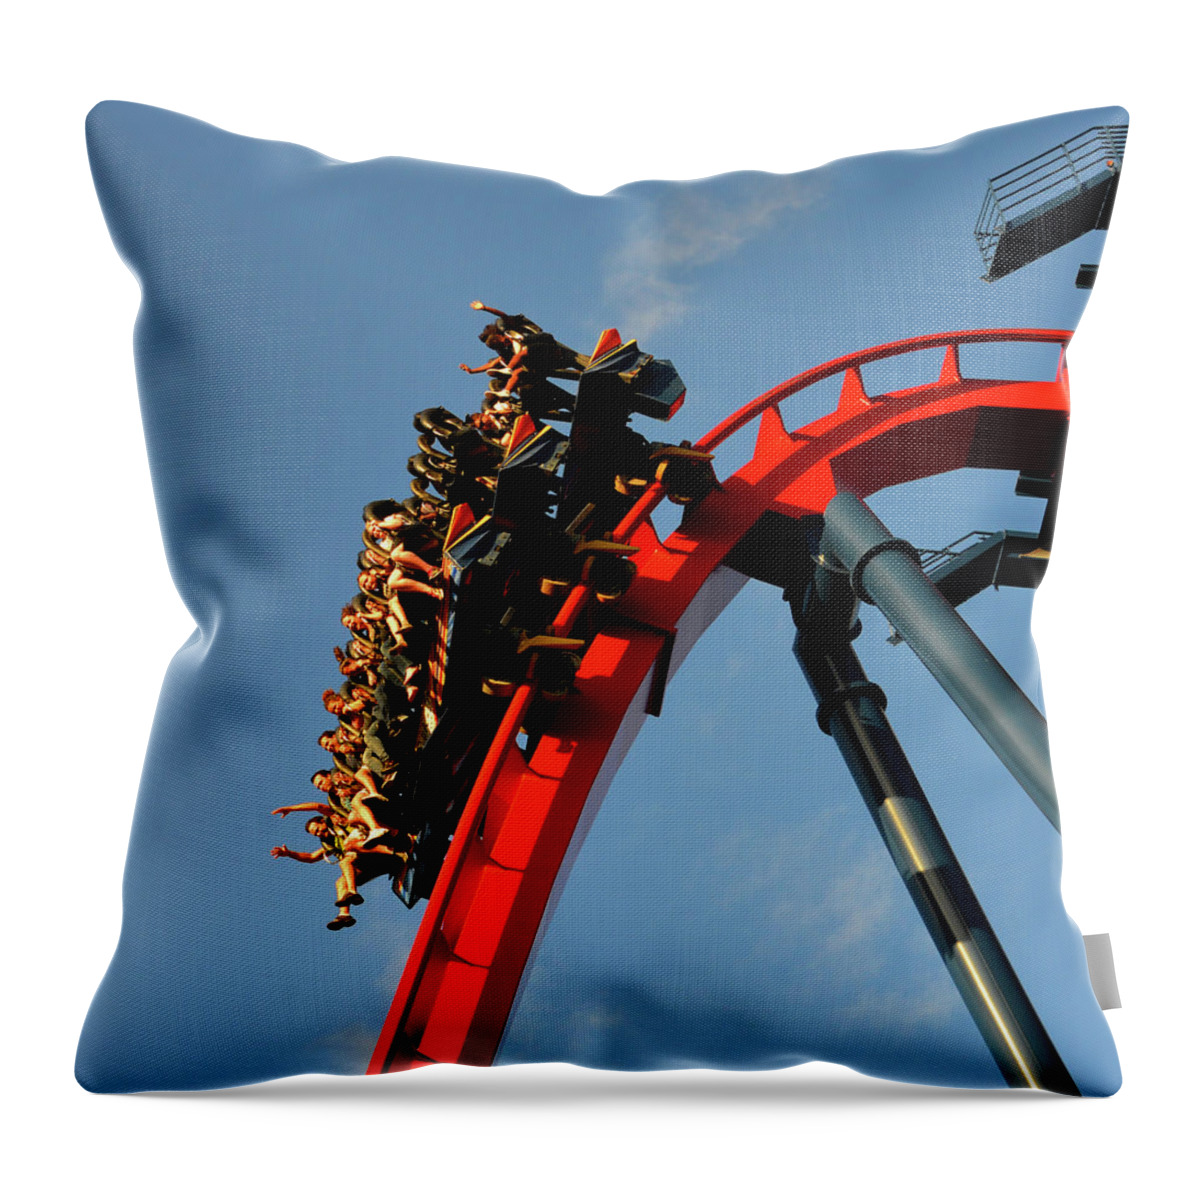 Sheikra Throw Pillow featuring the photograph Sheikra's big drop by David Lee Thompson